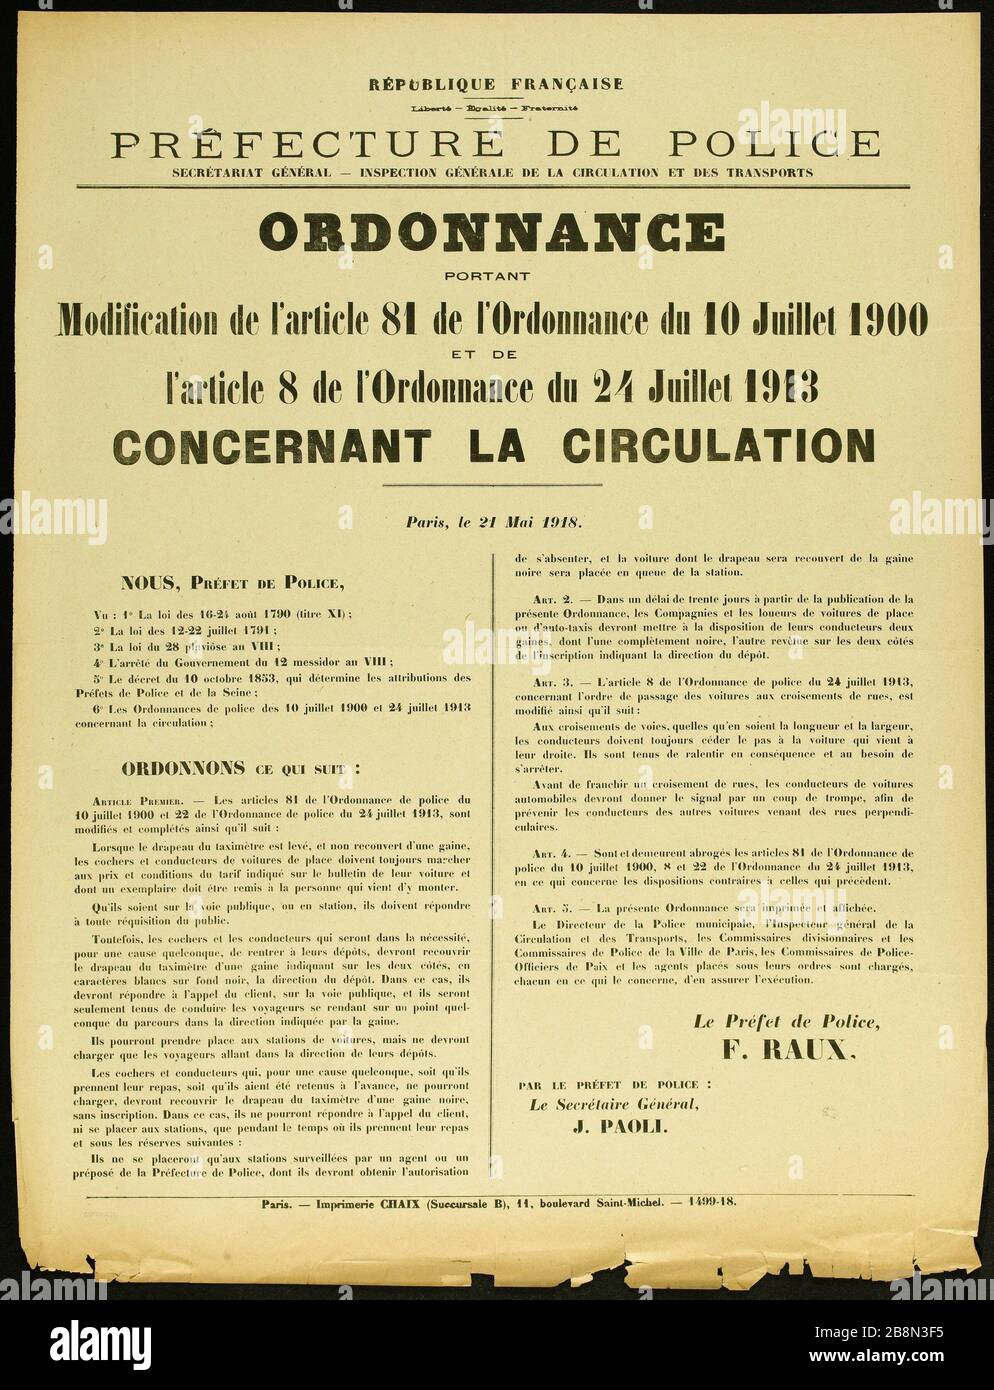 FRENCH REPUBLIC, Freedom - Egalité- Brotherhood prefecture POLICE GENERAL SECRETARIAT. - GENERAL INSPECTION OF TRAFFIC AND TRANSPORTATION, ORDER / Amendment of section 81 of the Ordinance of July 10, 1900 AND Article 8 of the Ordinance of July 24, 1913 REGARDING TRAFFIC Imprimerie Chaix. REPUBLIQUE FRANCAISE, Liberté - Egalité- Fraternité, PREFECTURE DE POLICE, SECRETARIAT GENERAL. - INSPECTION GENERALE DE LA CIRCULATION ET DES TRANSPORTS, ORDONNANCE PORTANT/ Modification de l'article 81 de l'Ordonnance du 10 Juillet 1900 ET DE de l'article 8 de l'Ordonnance du 24 Juillet 1913 CONCERNANT LA CI Stock Photo